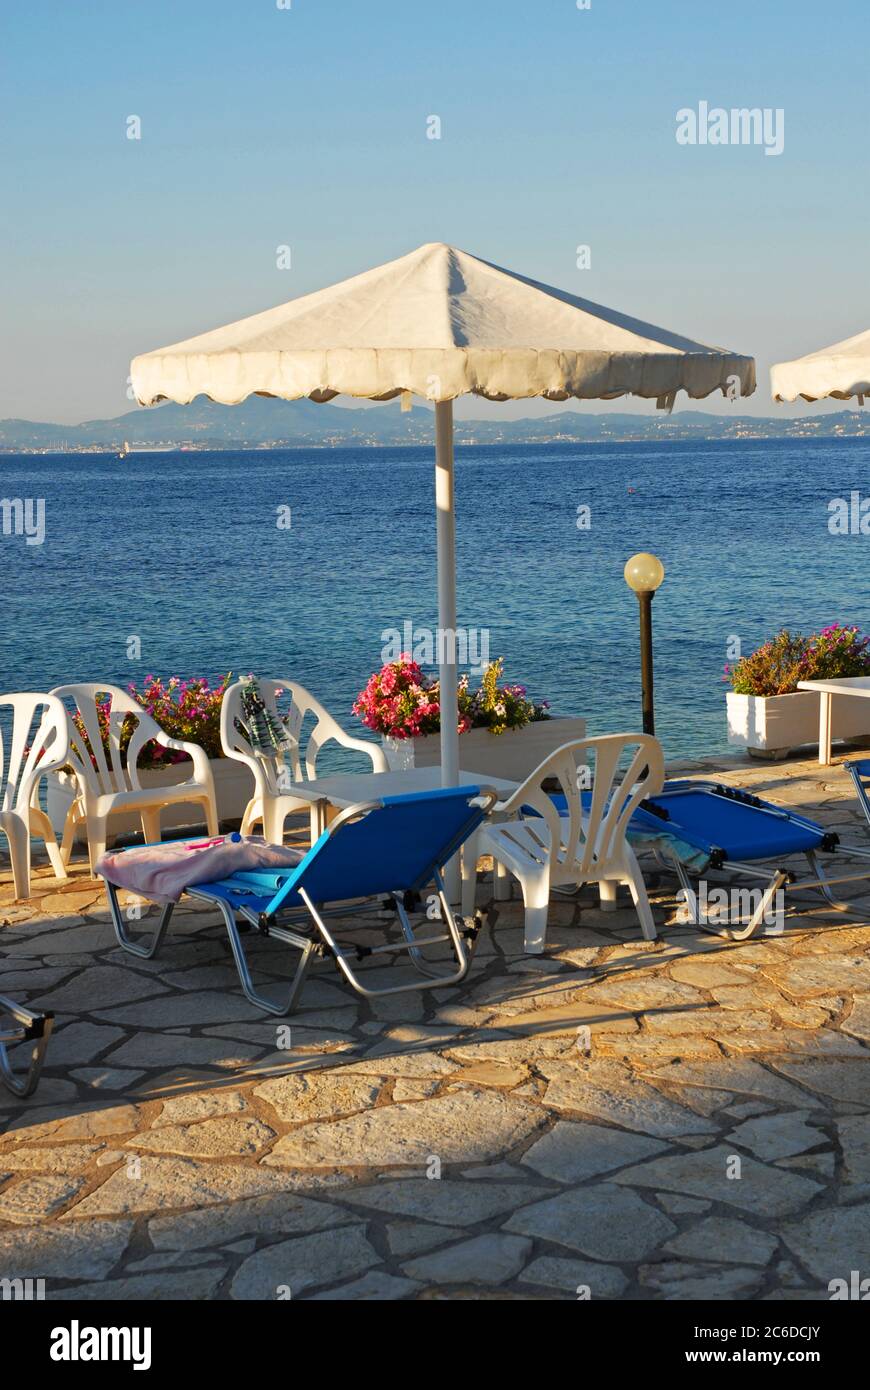 Early morning at hotel, Corfu, Greece, with towel on sunbed to reserve it for later use Stock Photo